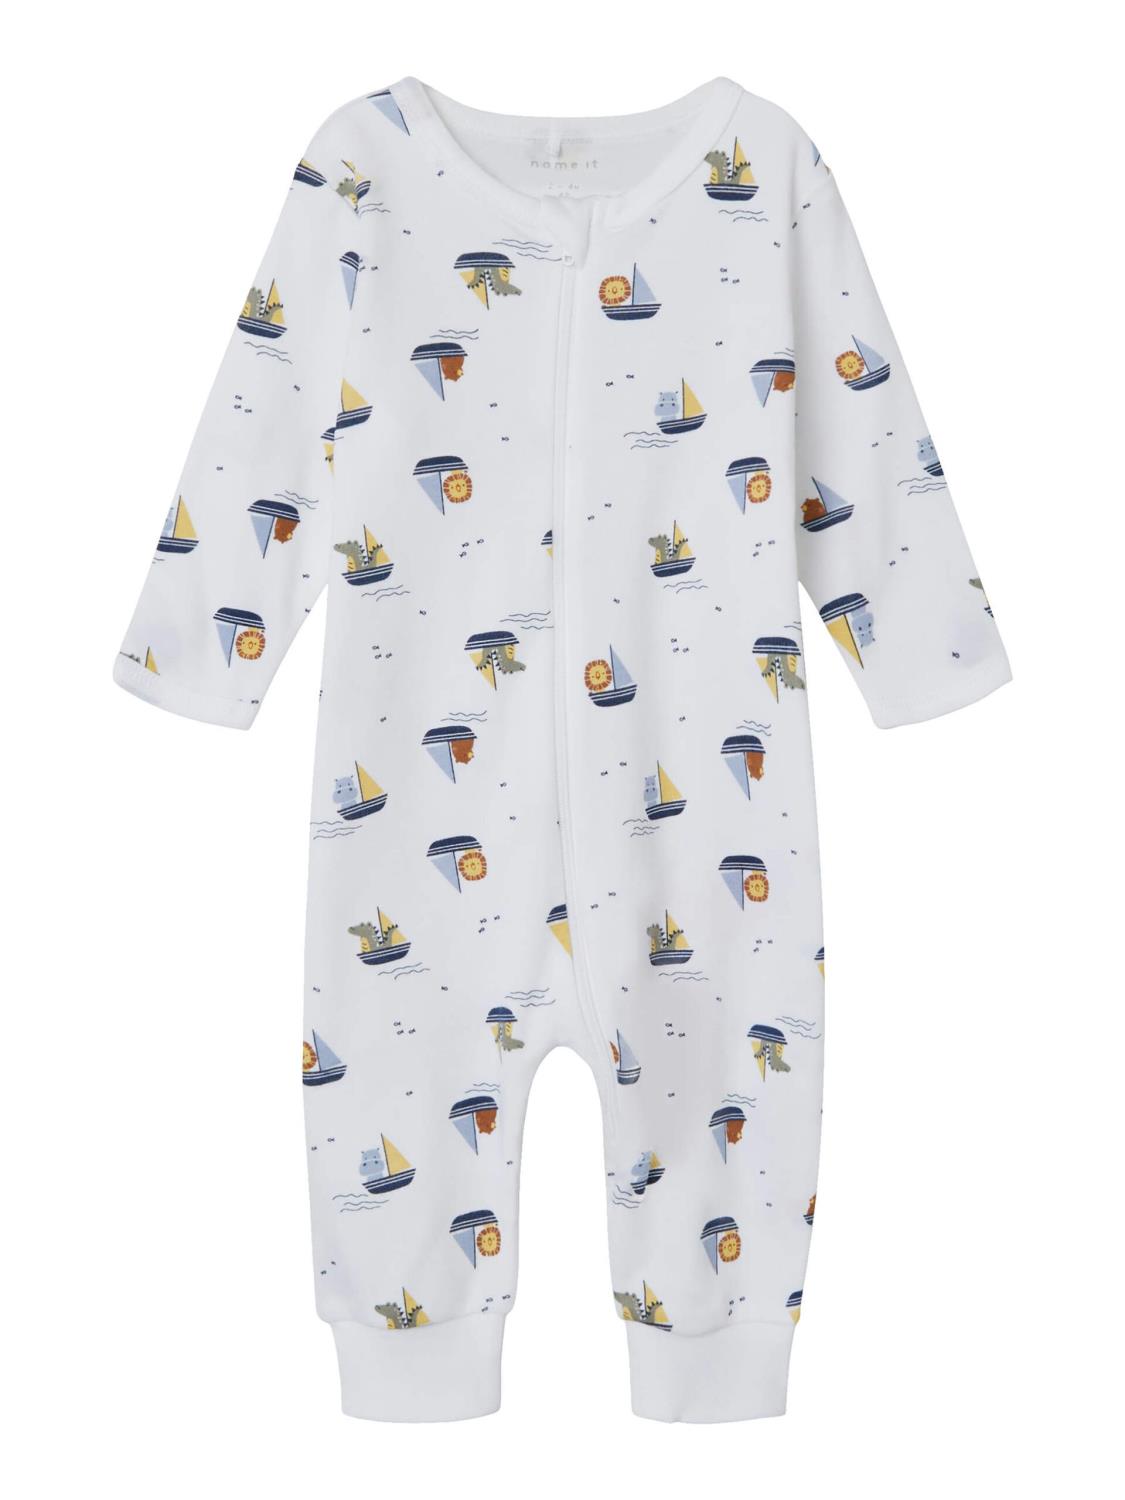 Nightsuit Zip Boats - Bright White